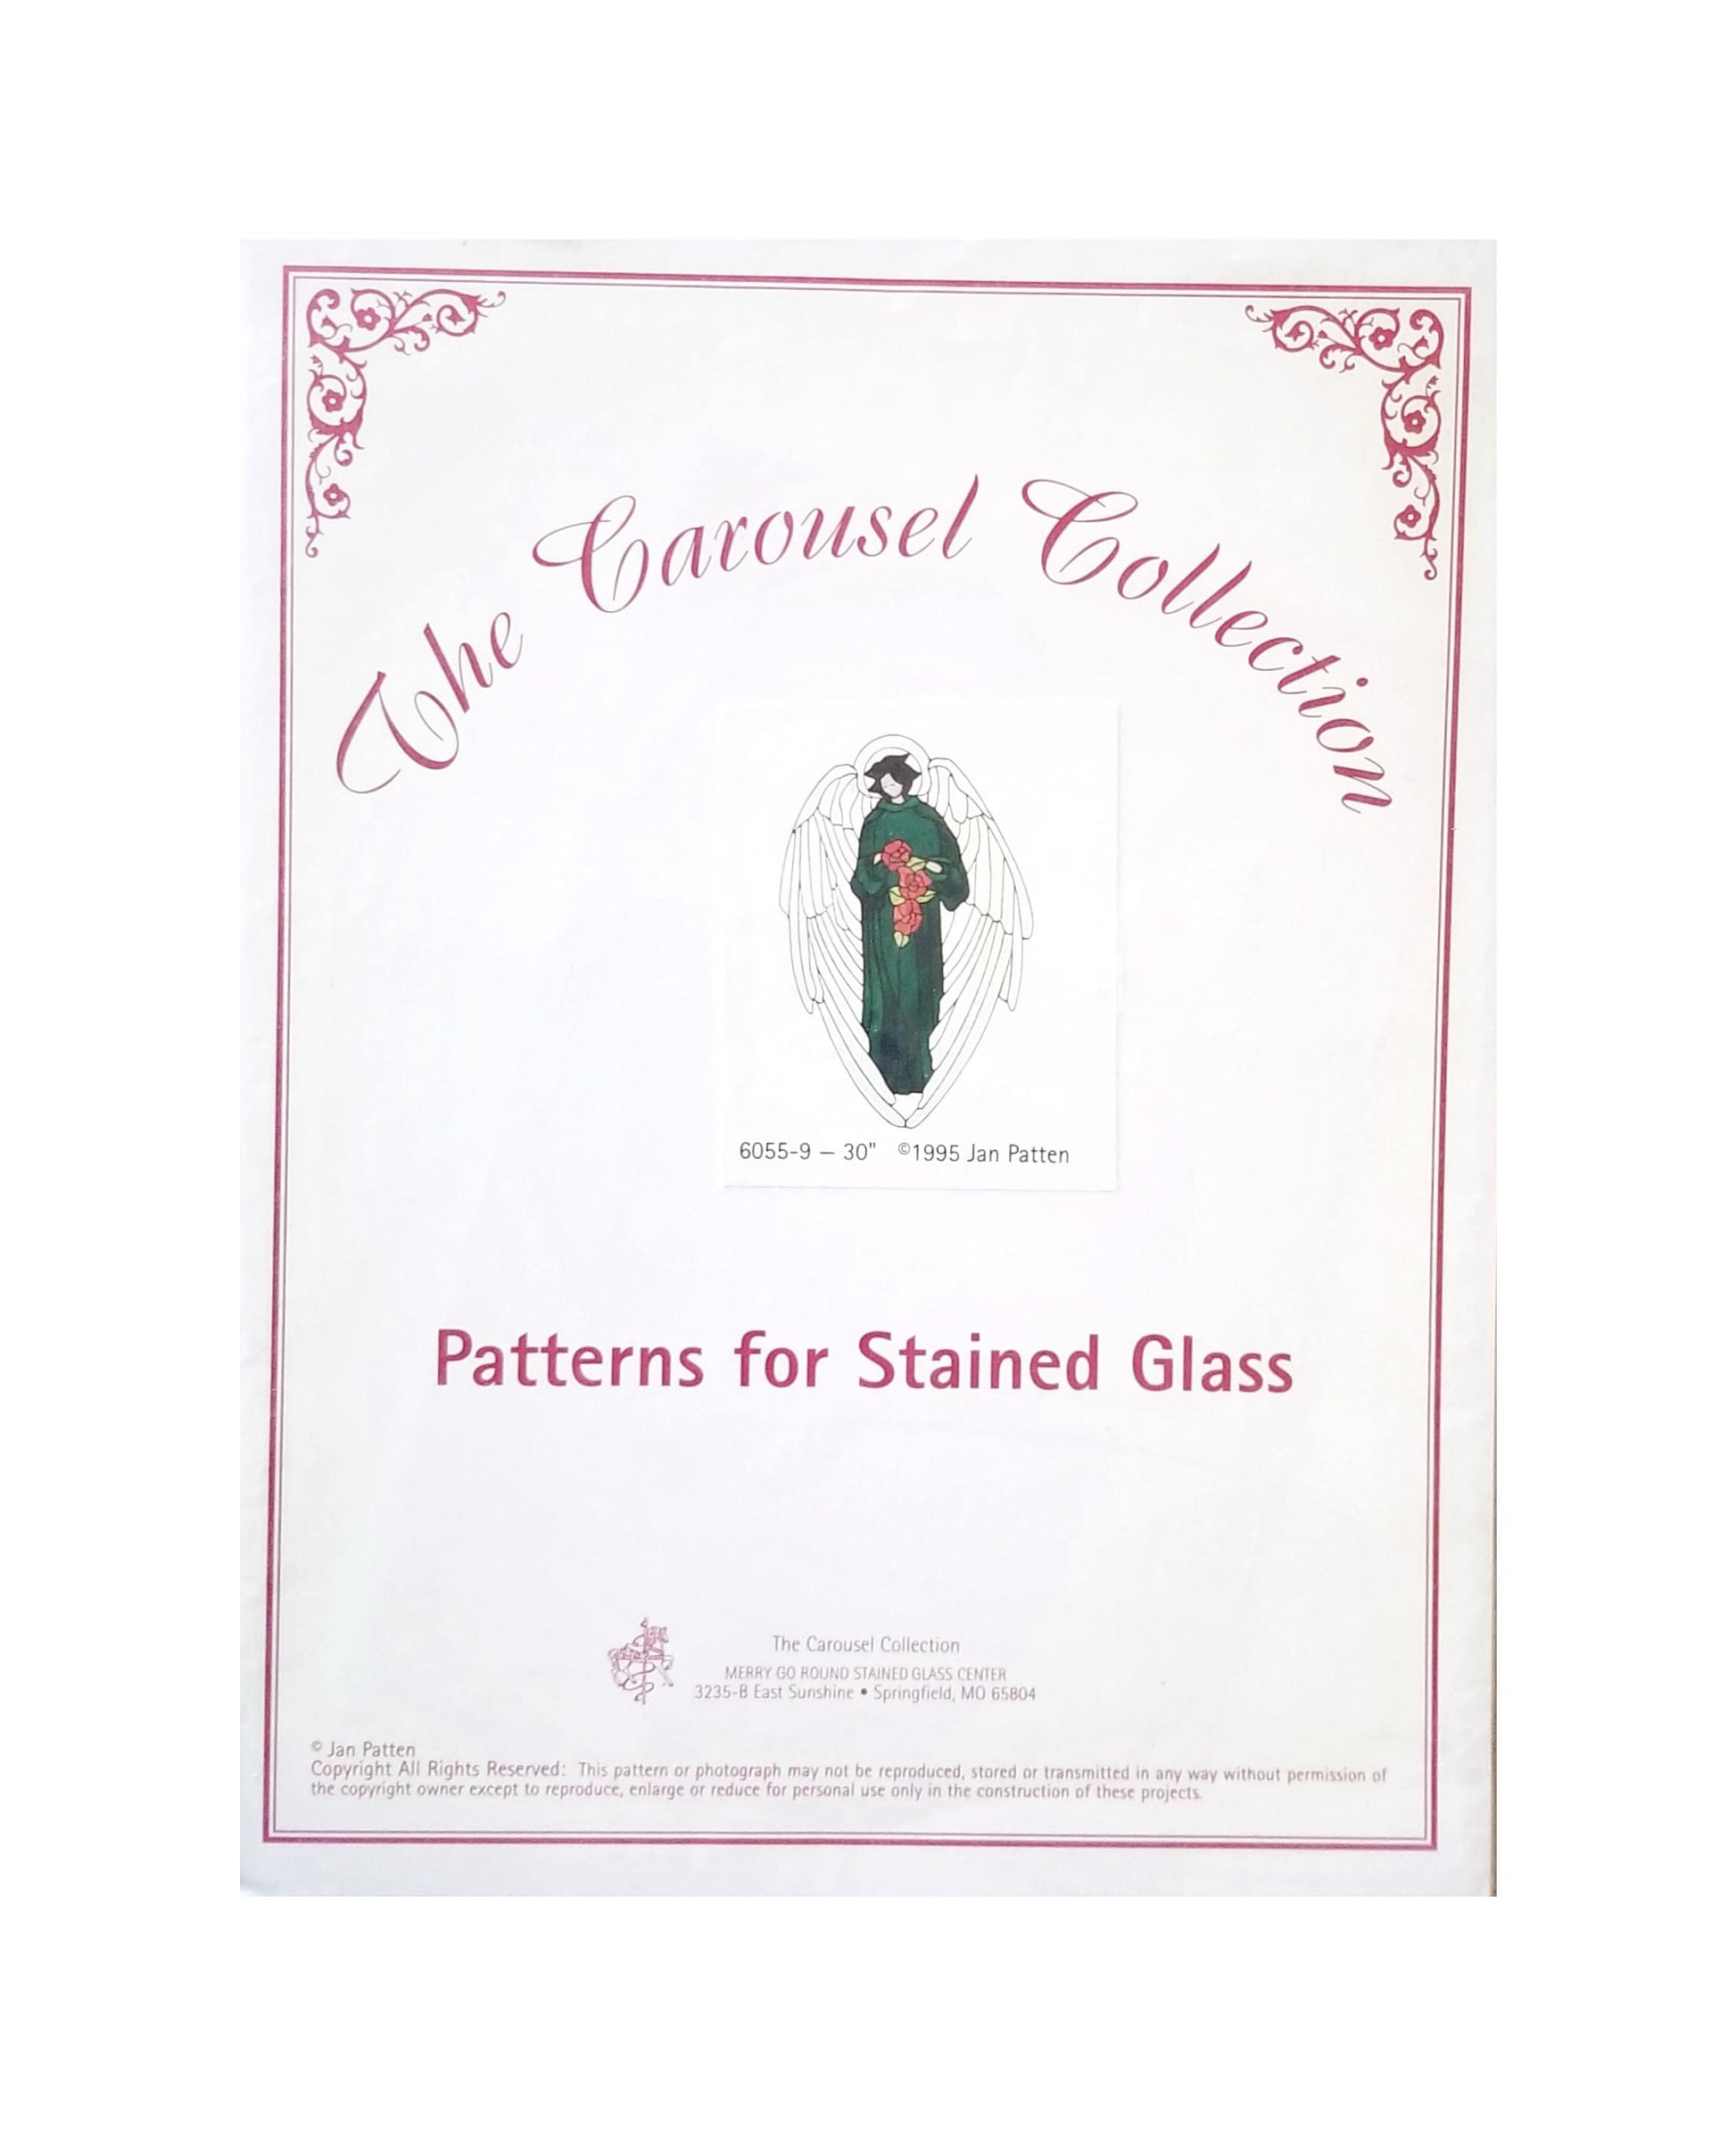 Angel Diy Stained Glass Pattern. Holiday Craft Project. Vintage, Pack Unopened. 30" tall, Graceful Angel holding a bouquet of flowers.